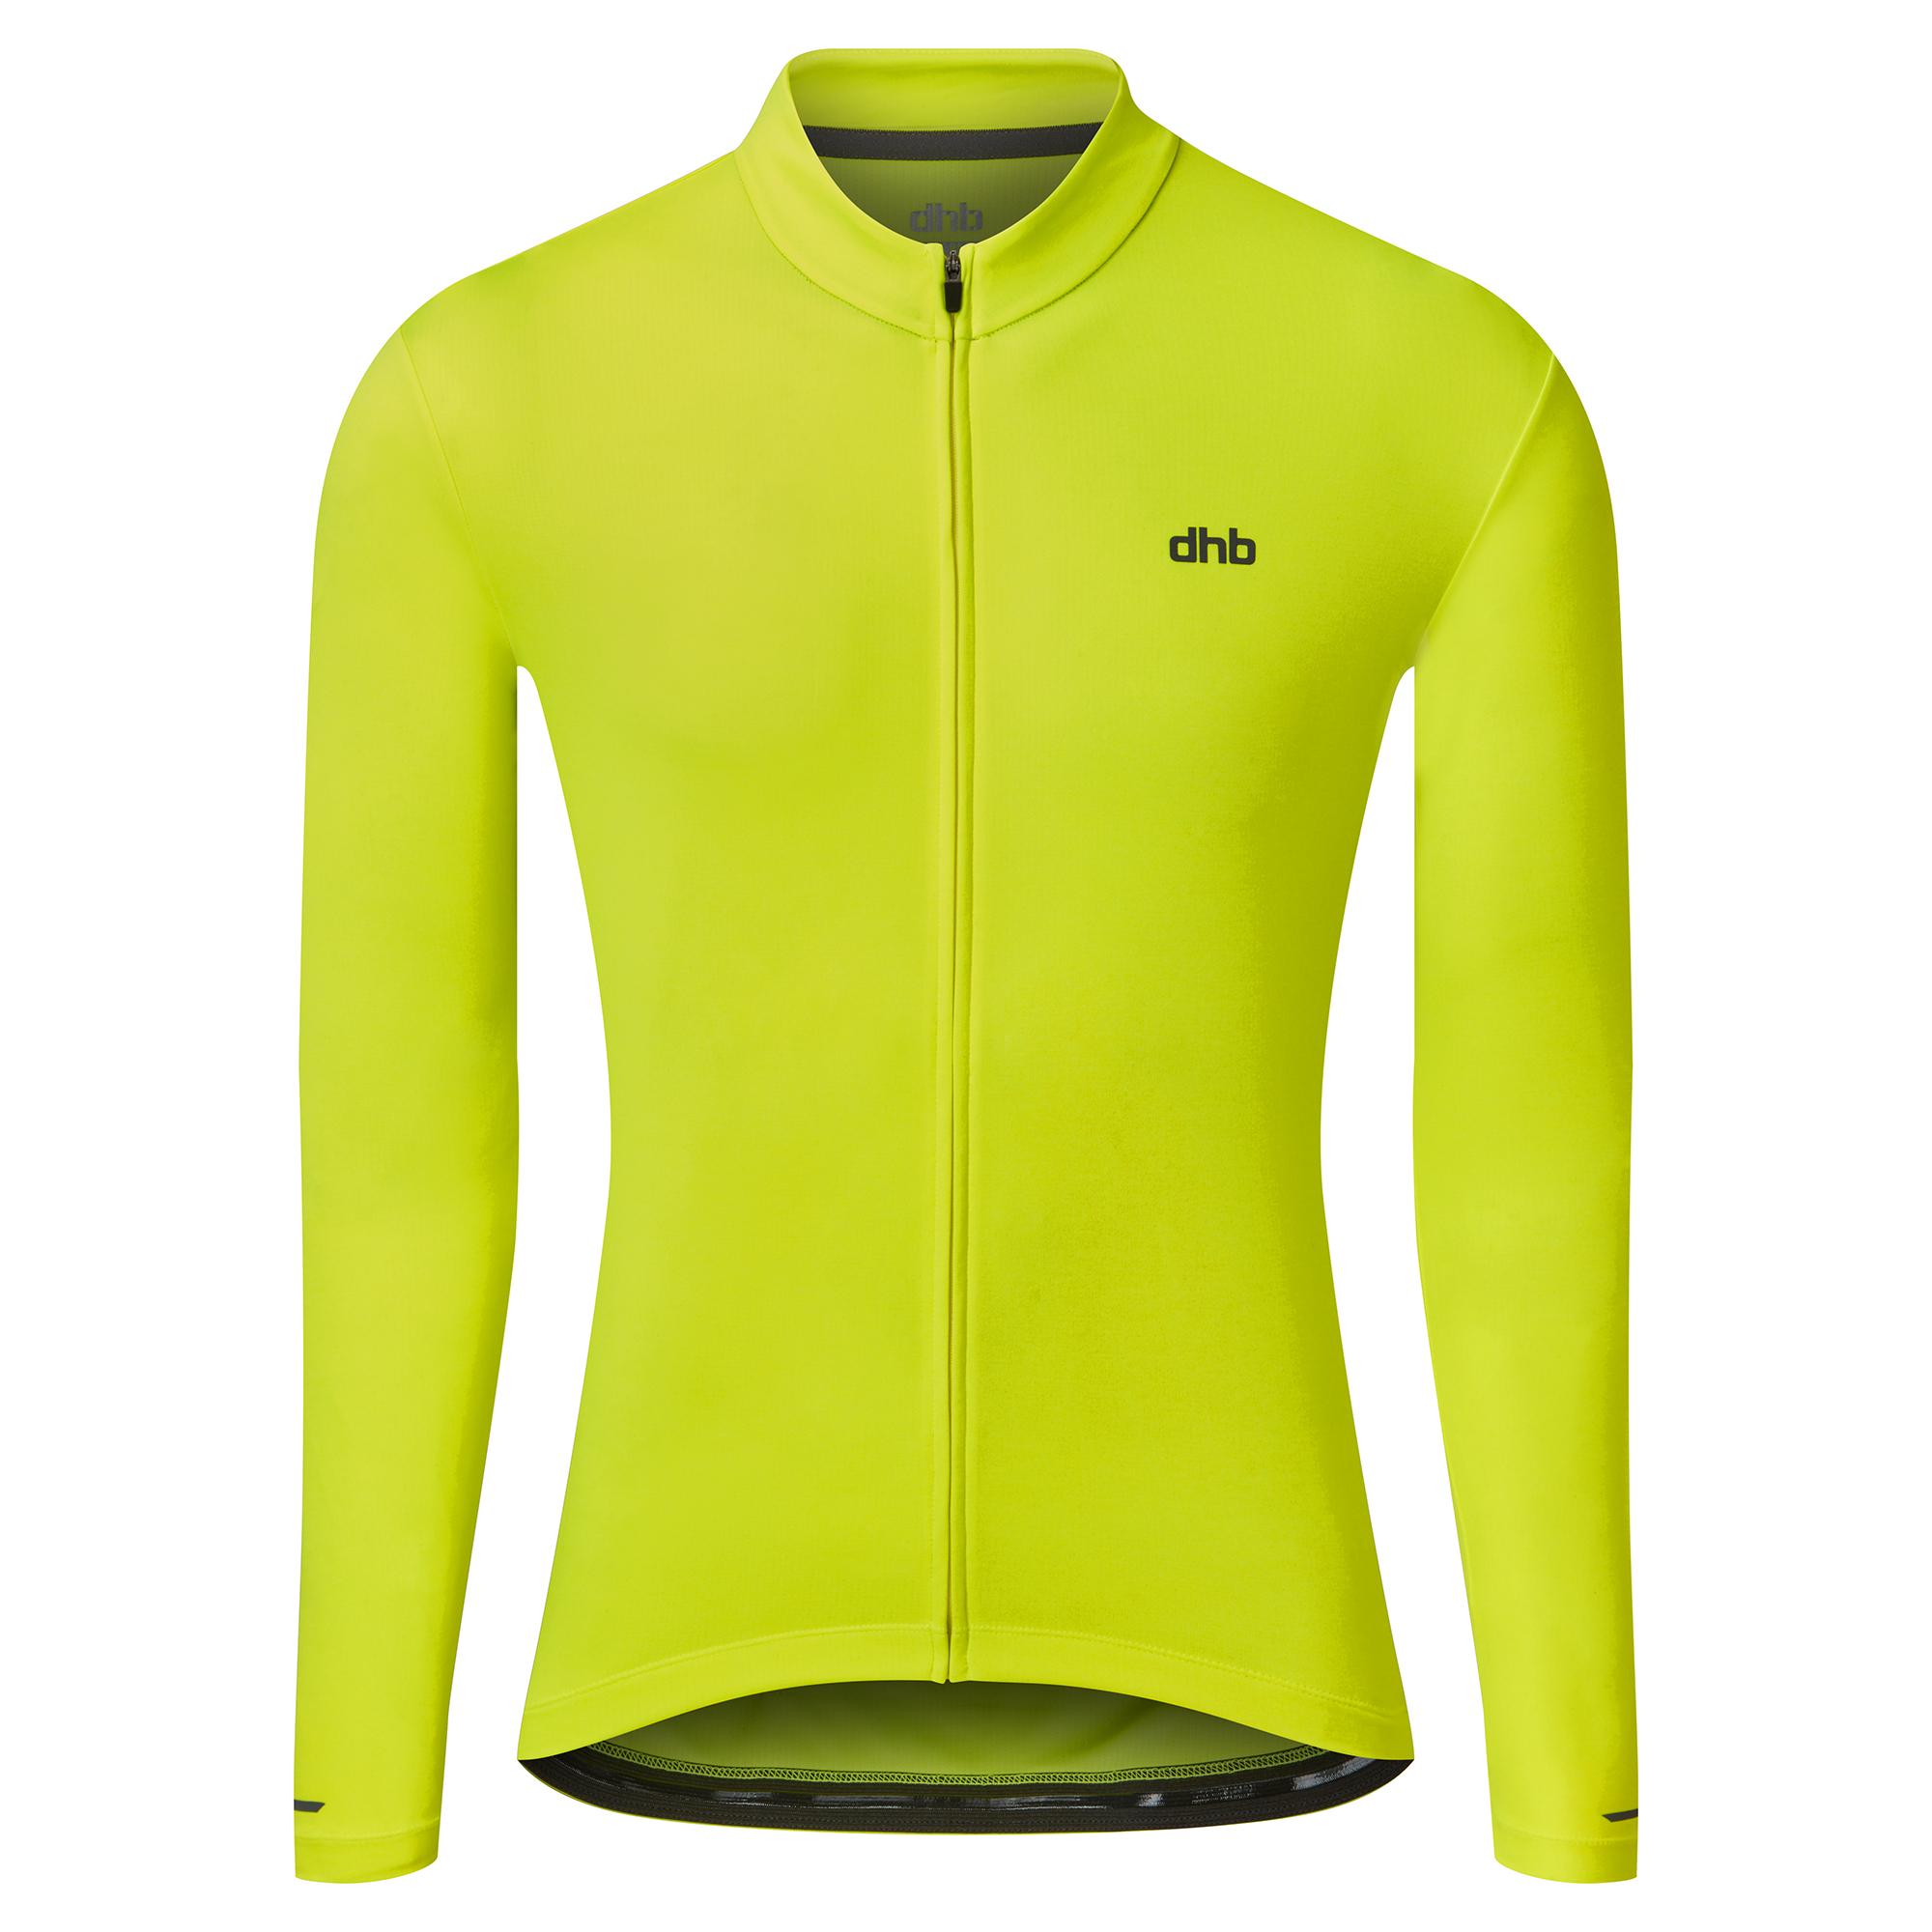 Dhb Long Sleeve Jersey - Safety Yellow